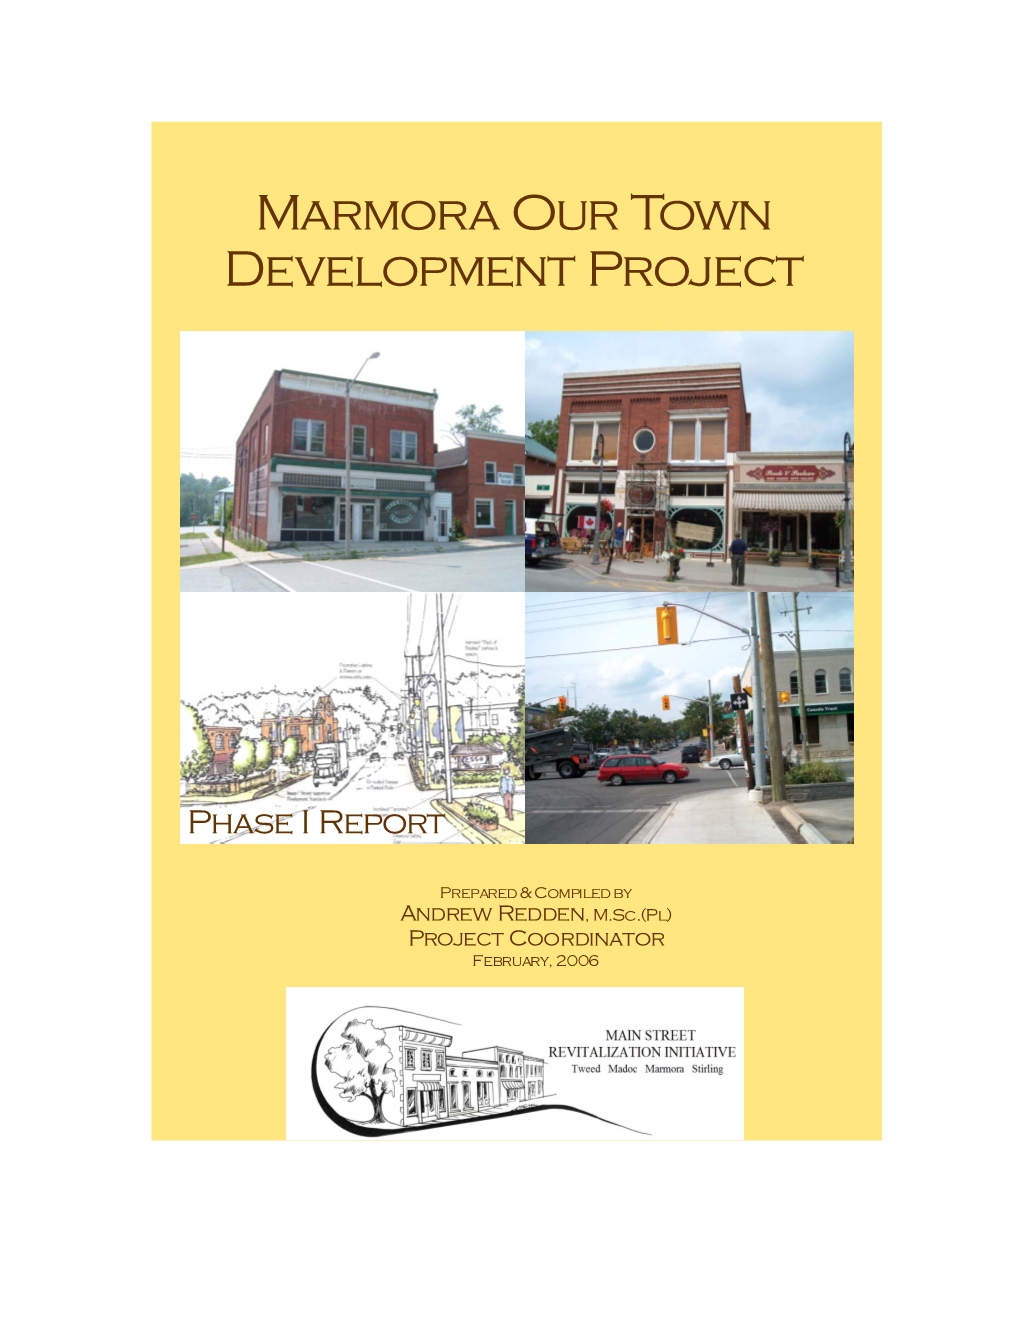 Marmora Our Town Development Project